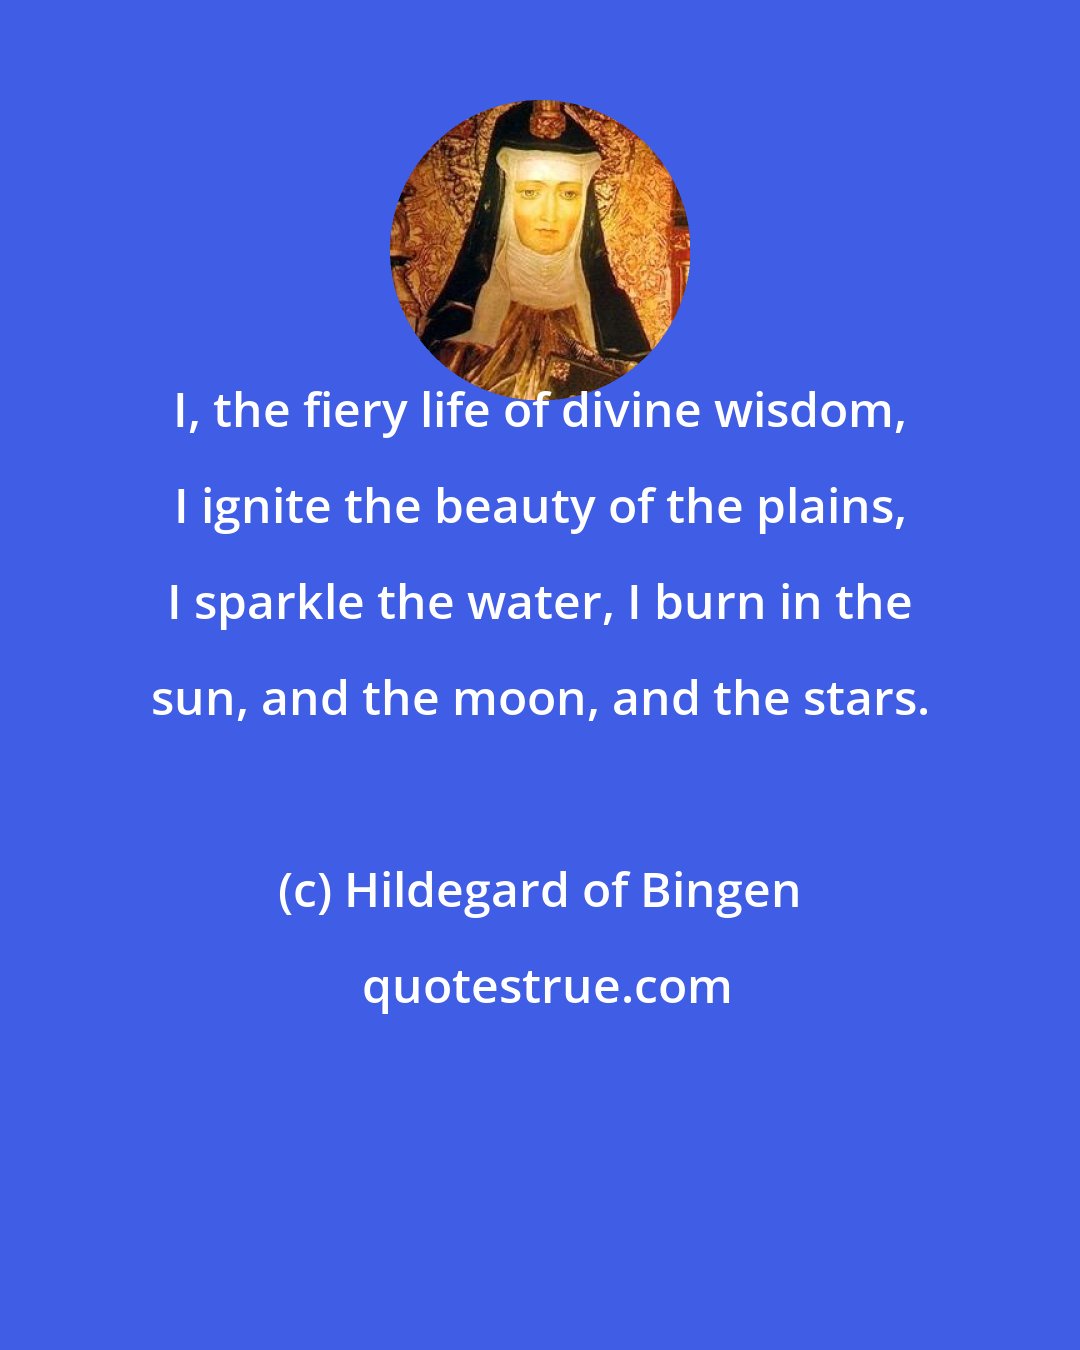 Hildegard of Bingen: I, the fiery life of divine wisdom, I ignite the beauty of the plains, I sparkle the water, I burn in the sun, and the moon, and the stars.